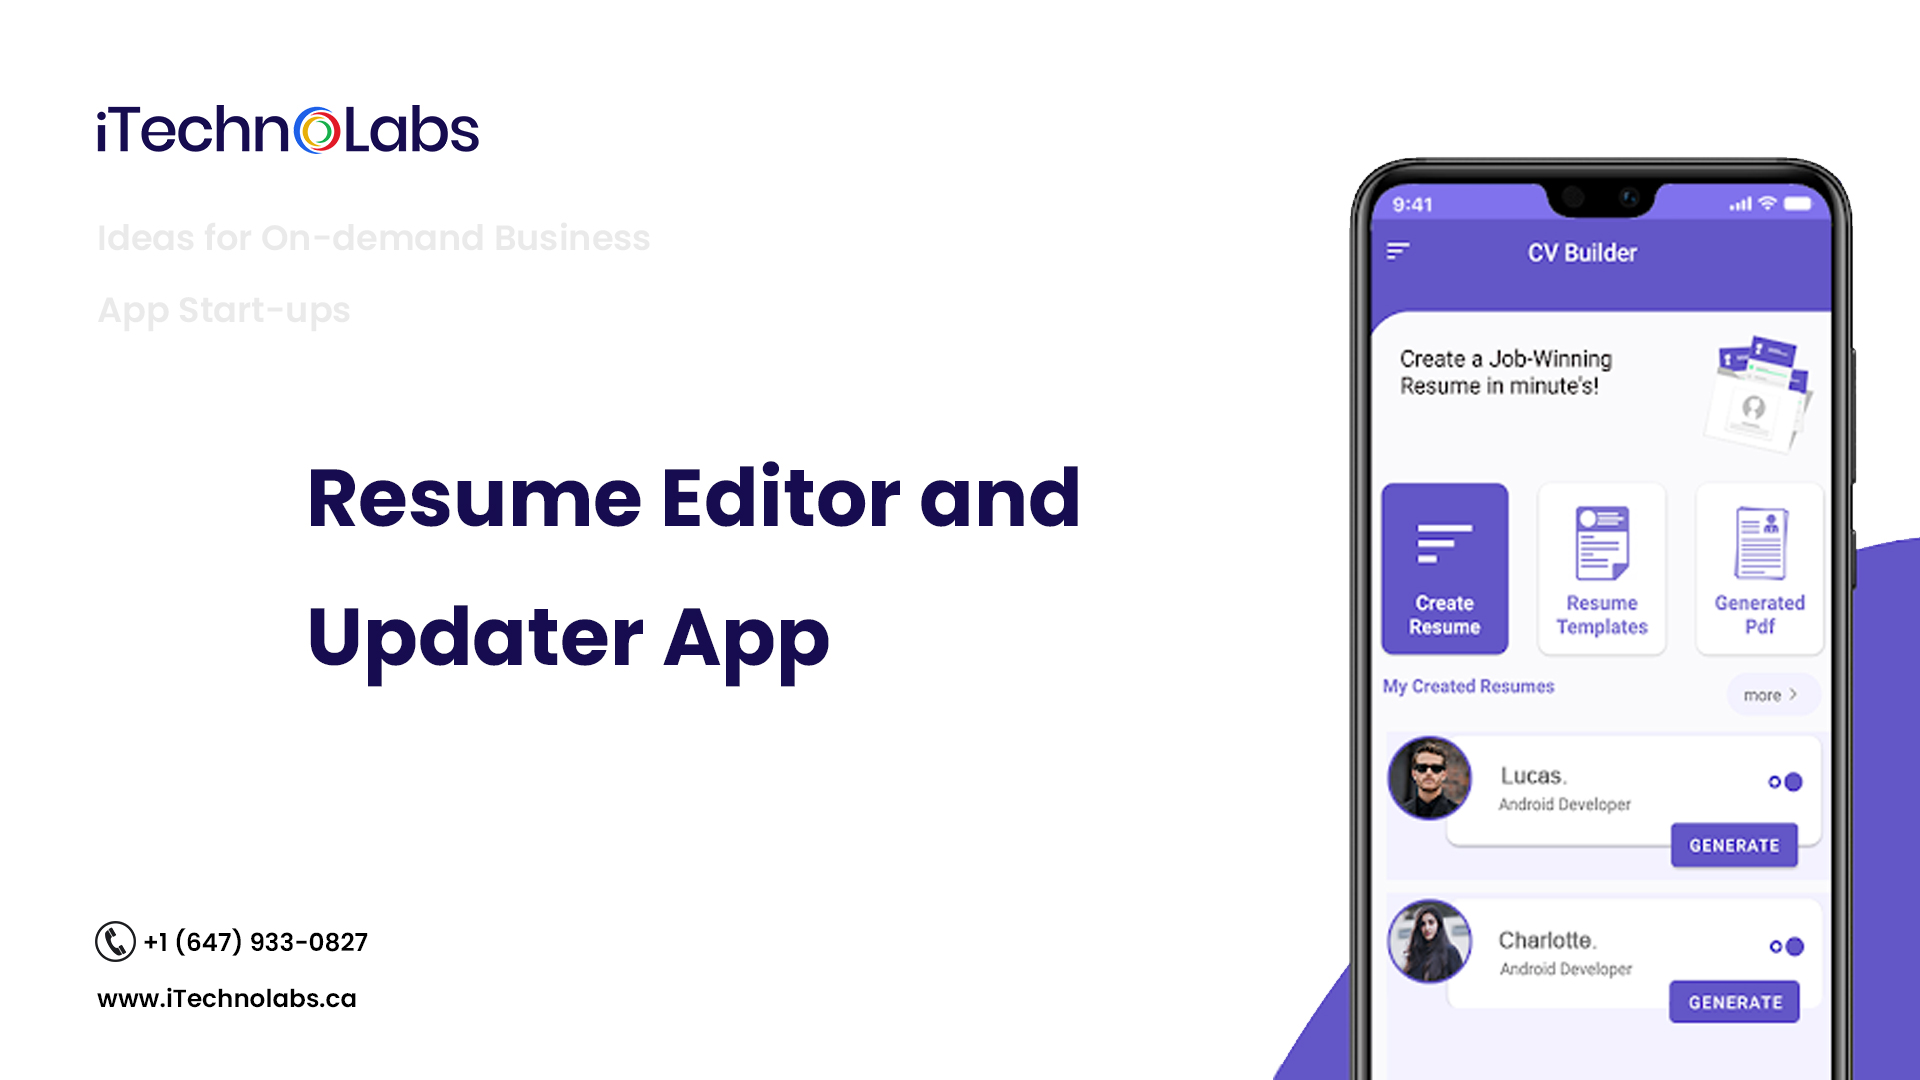 resume editor and updater app itechnolabs